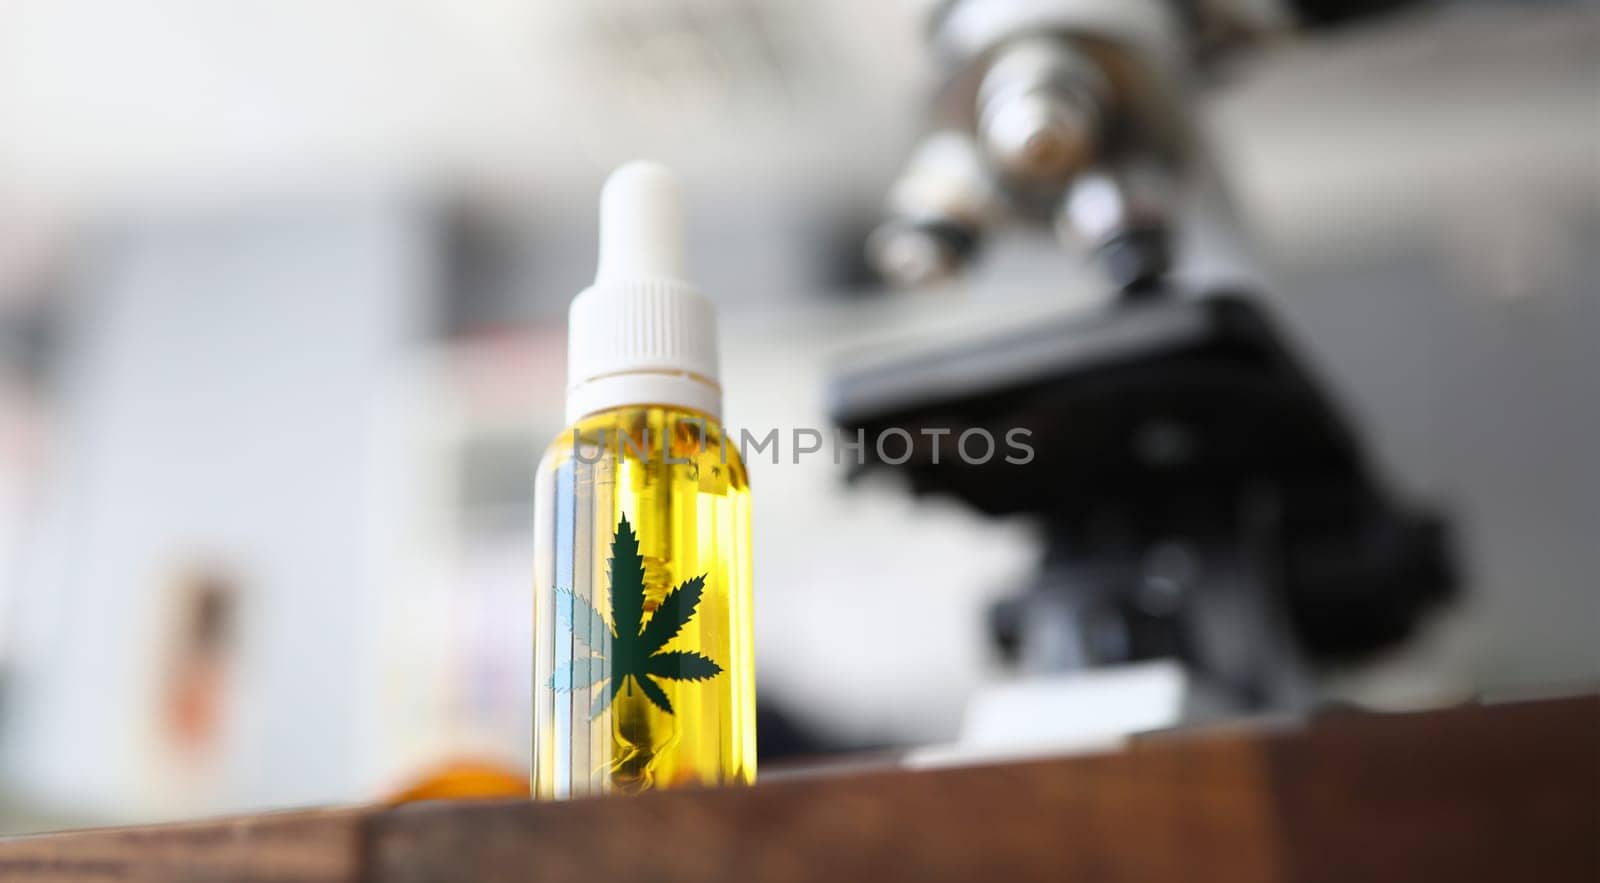 Focus on glass flask with cannabinoid oil and green ganja symbol on it. Laboratory interior with microscope on blurred background. Medicine and medical marijuana concept